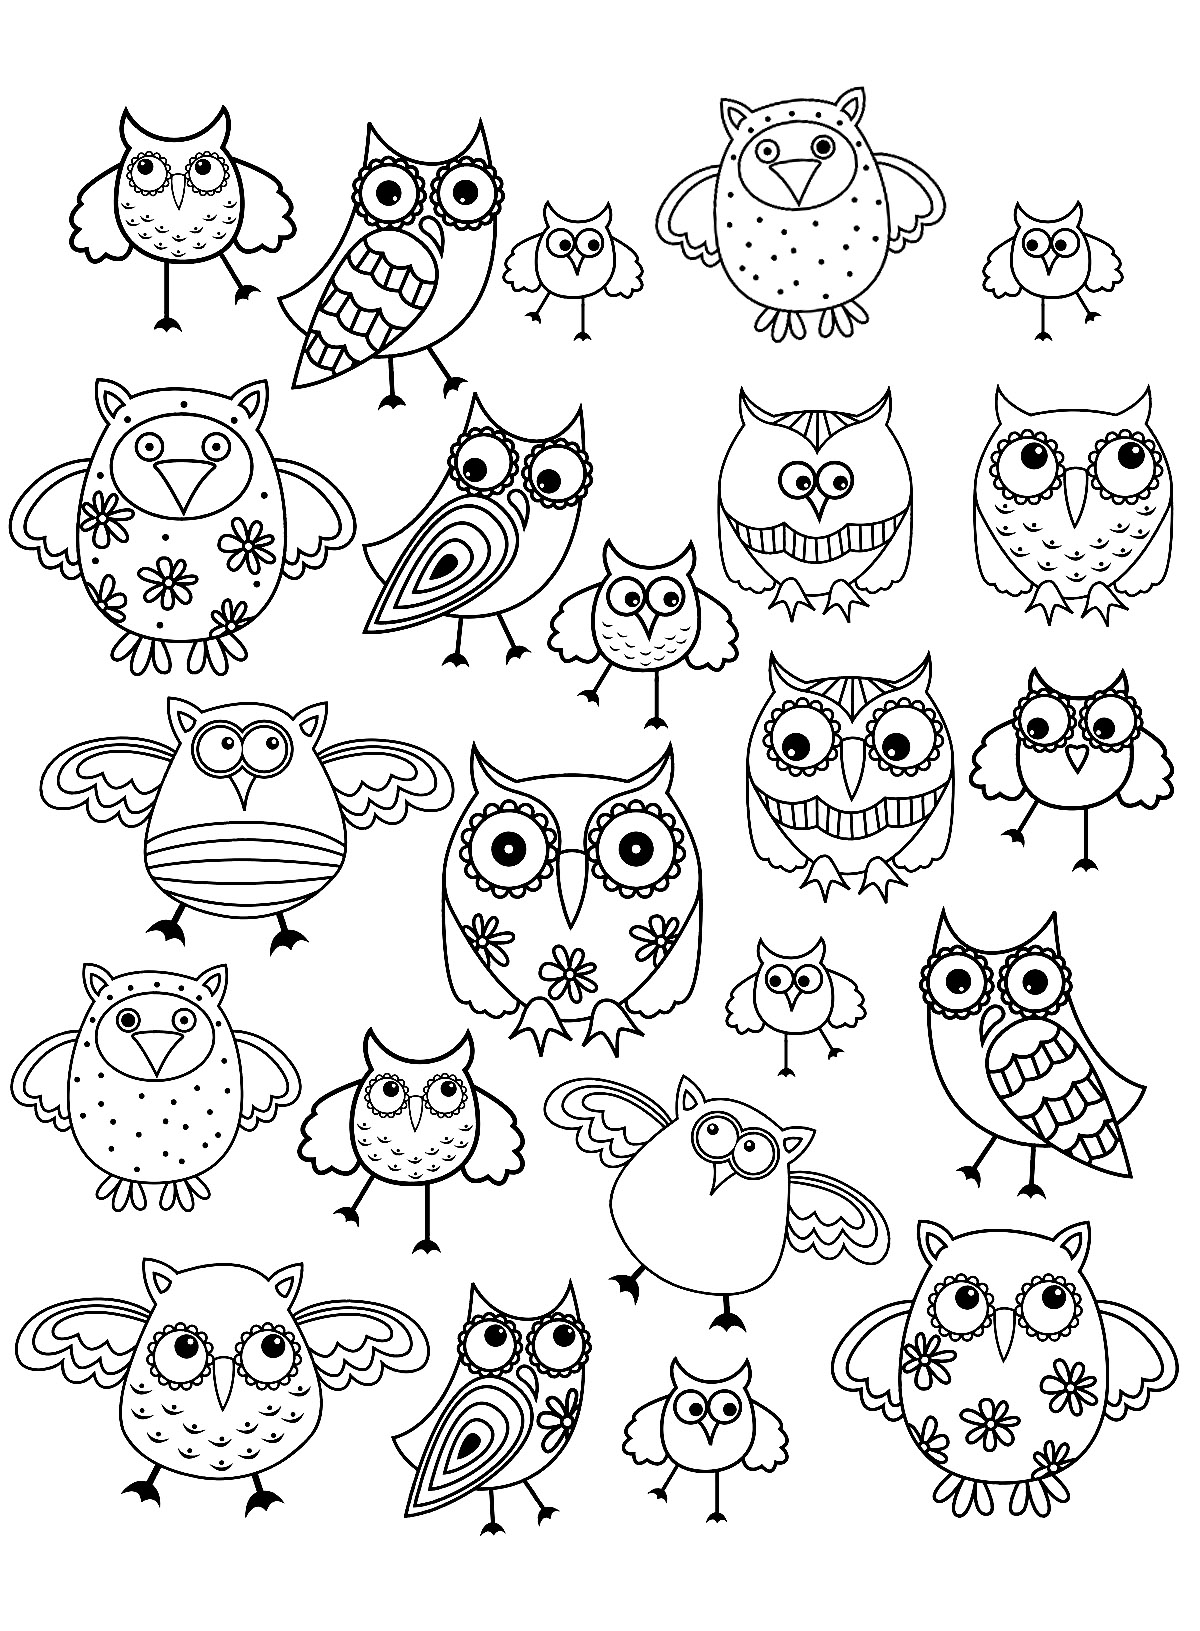 Doodle-a-color-easy-return-to-classroom-by-9-george - Doodle Art Kids  Coloring Pages